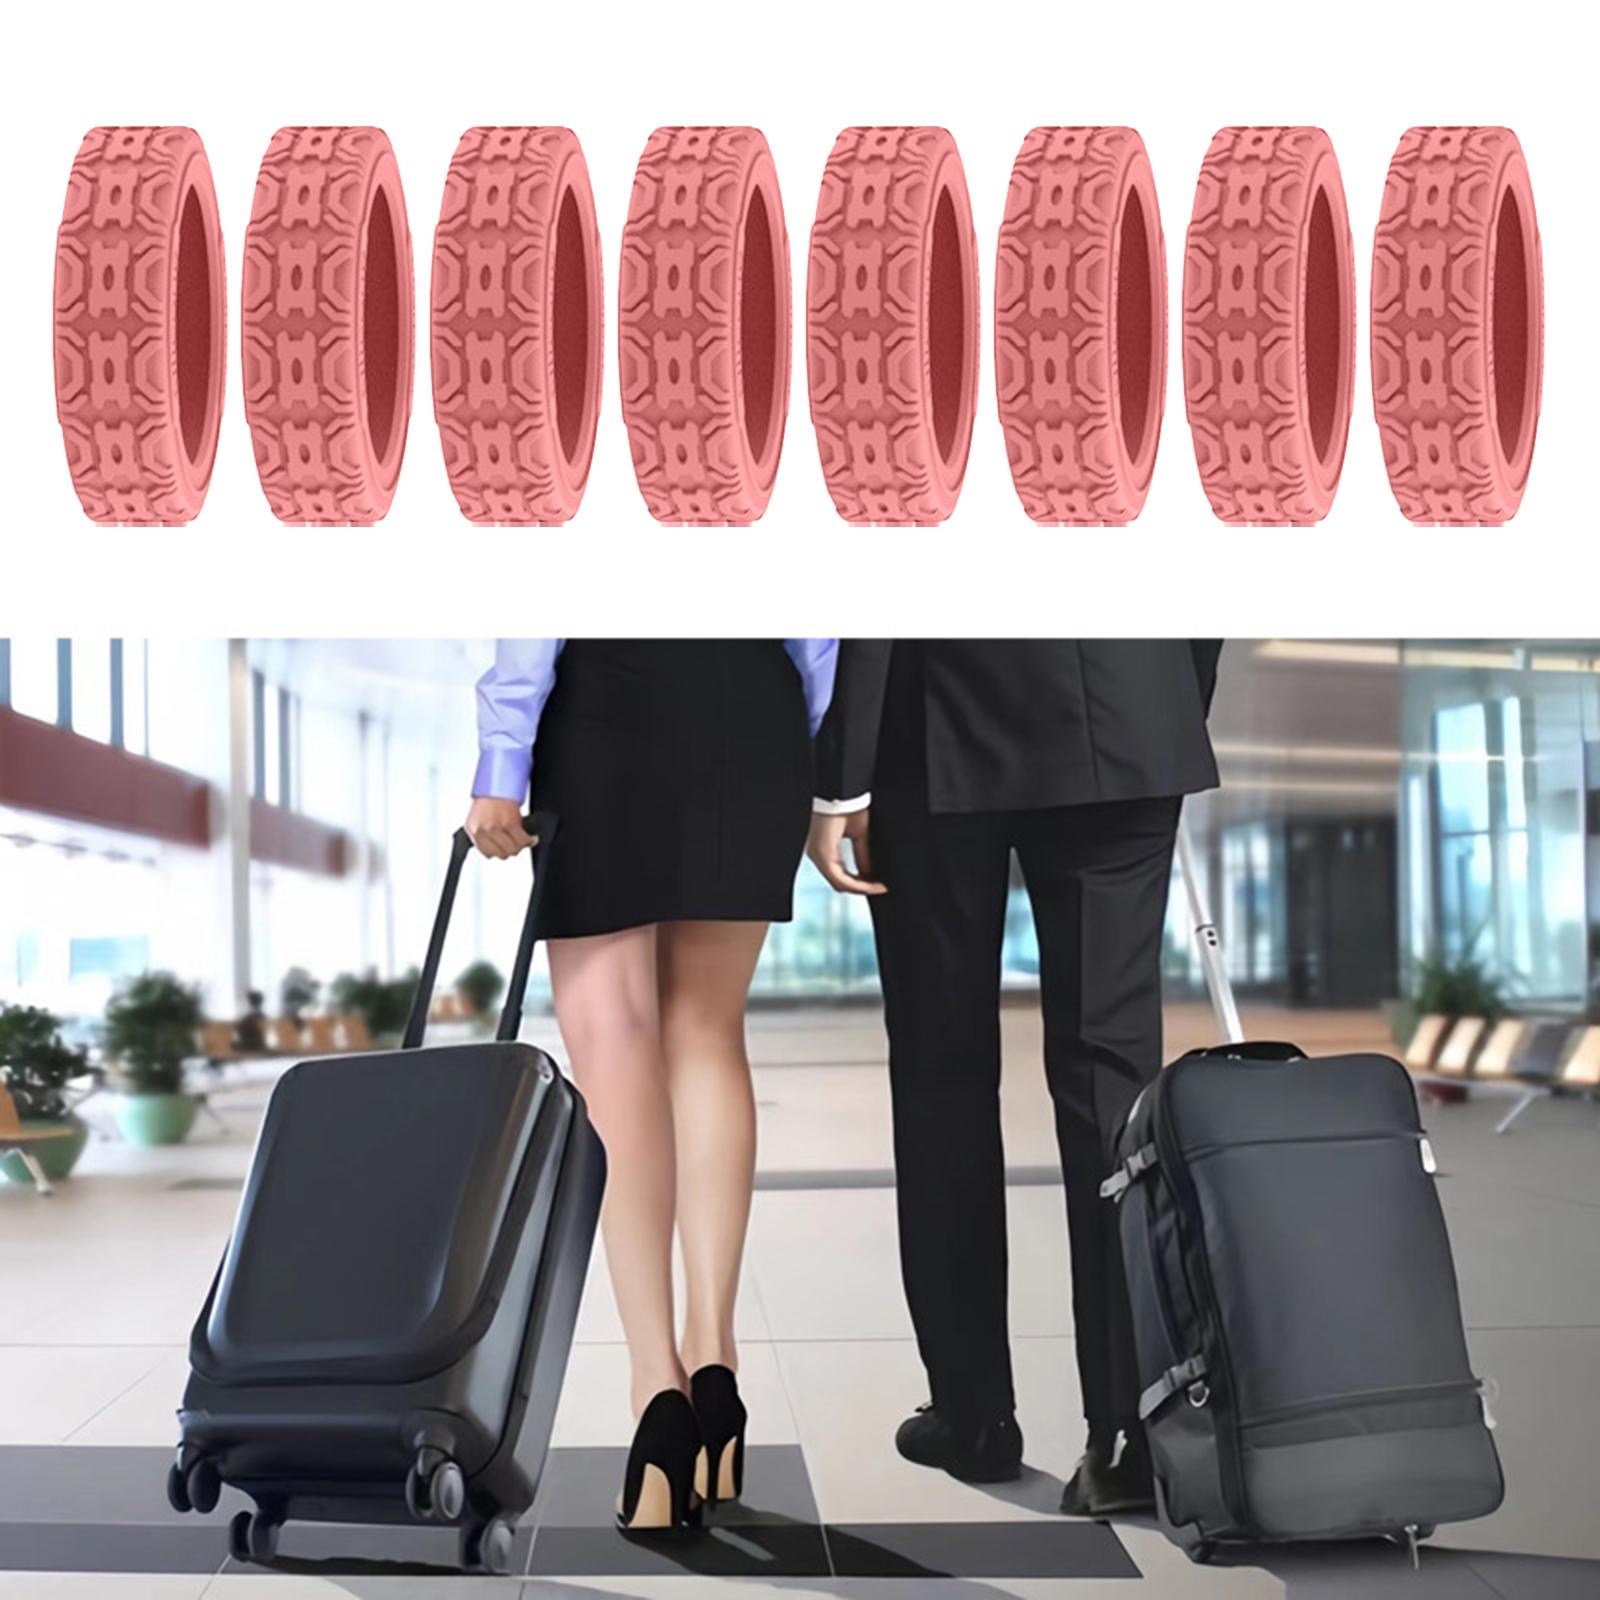 8x Silicone Luggage Wheel Covers Silicone Protective Cover for Most Suitcase Pink